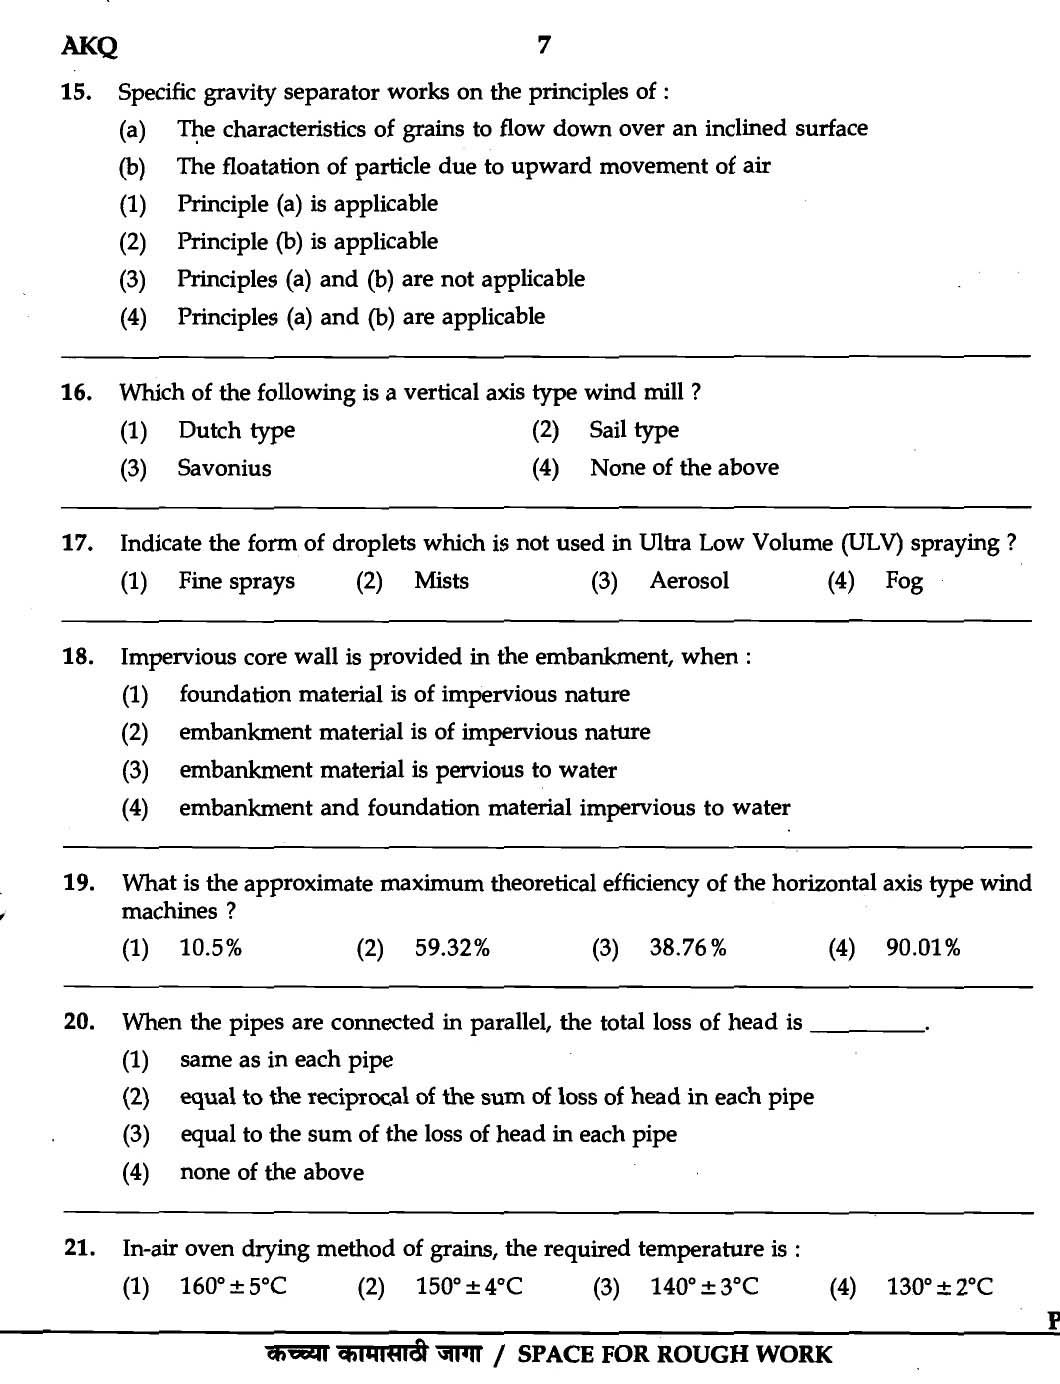 MPSC Agricultural Services Exam 2007 Question Paper Agricultural Engineering 5